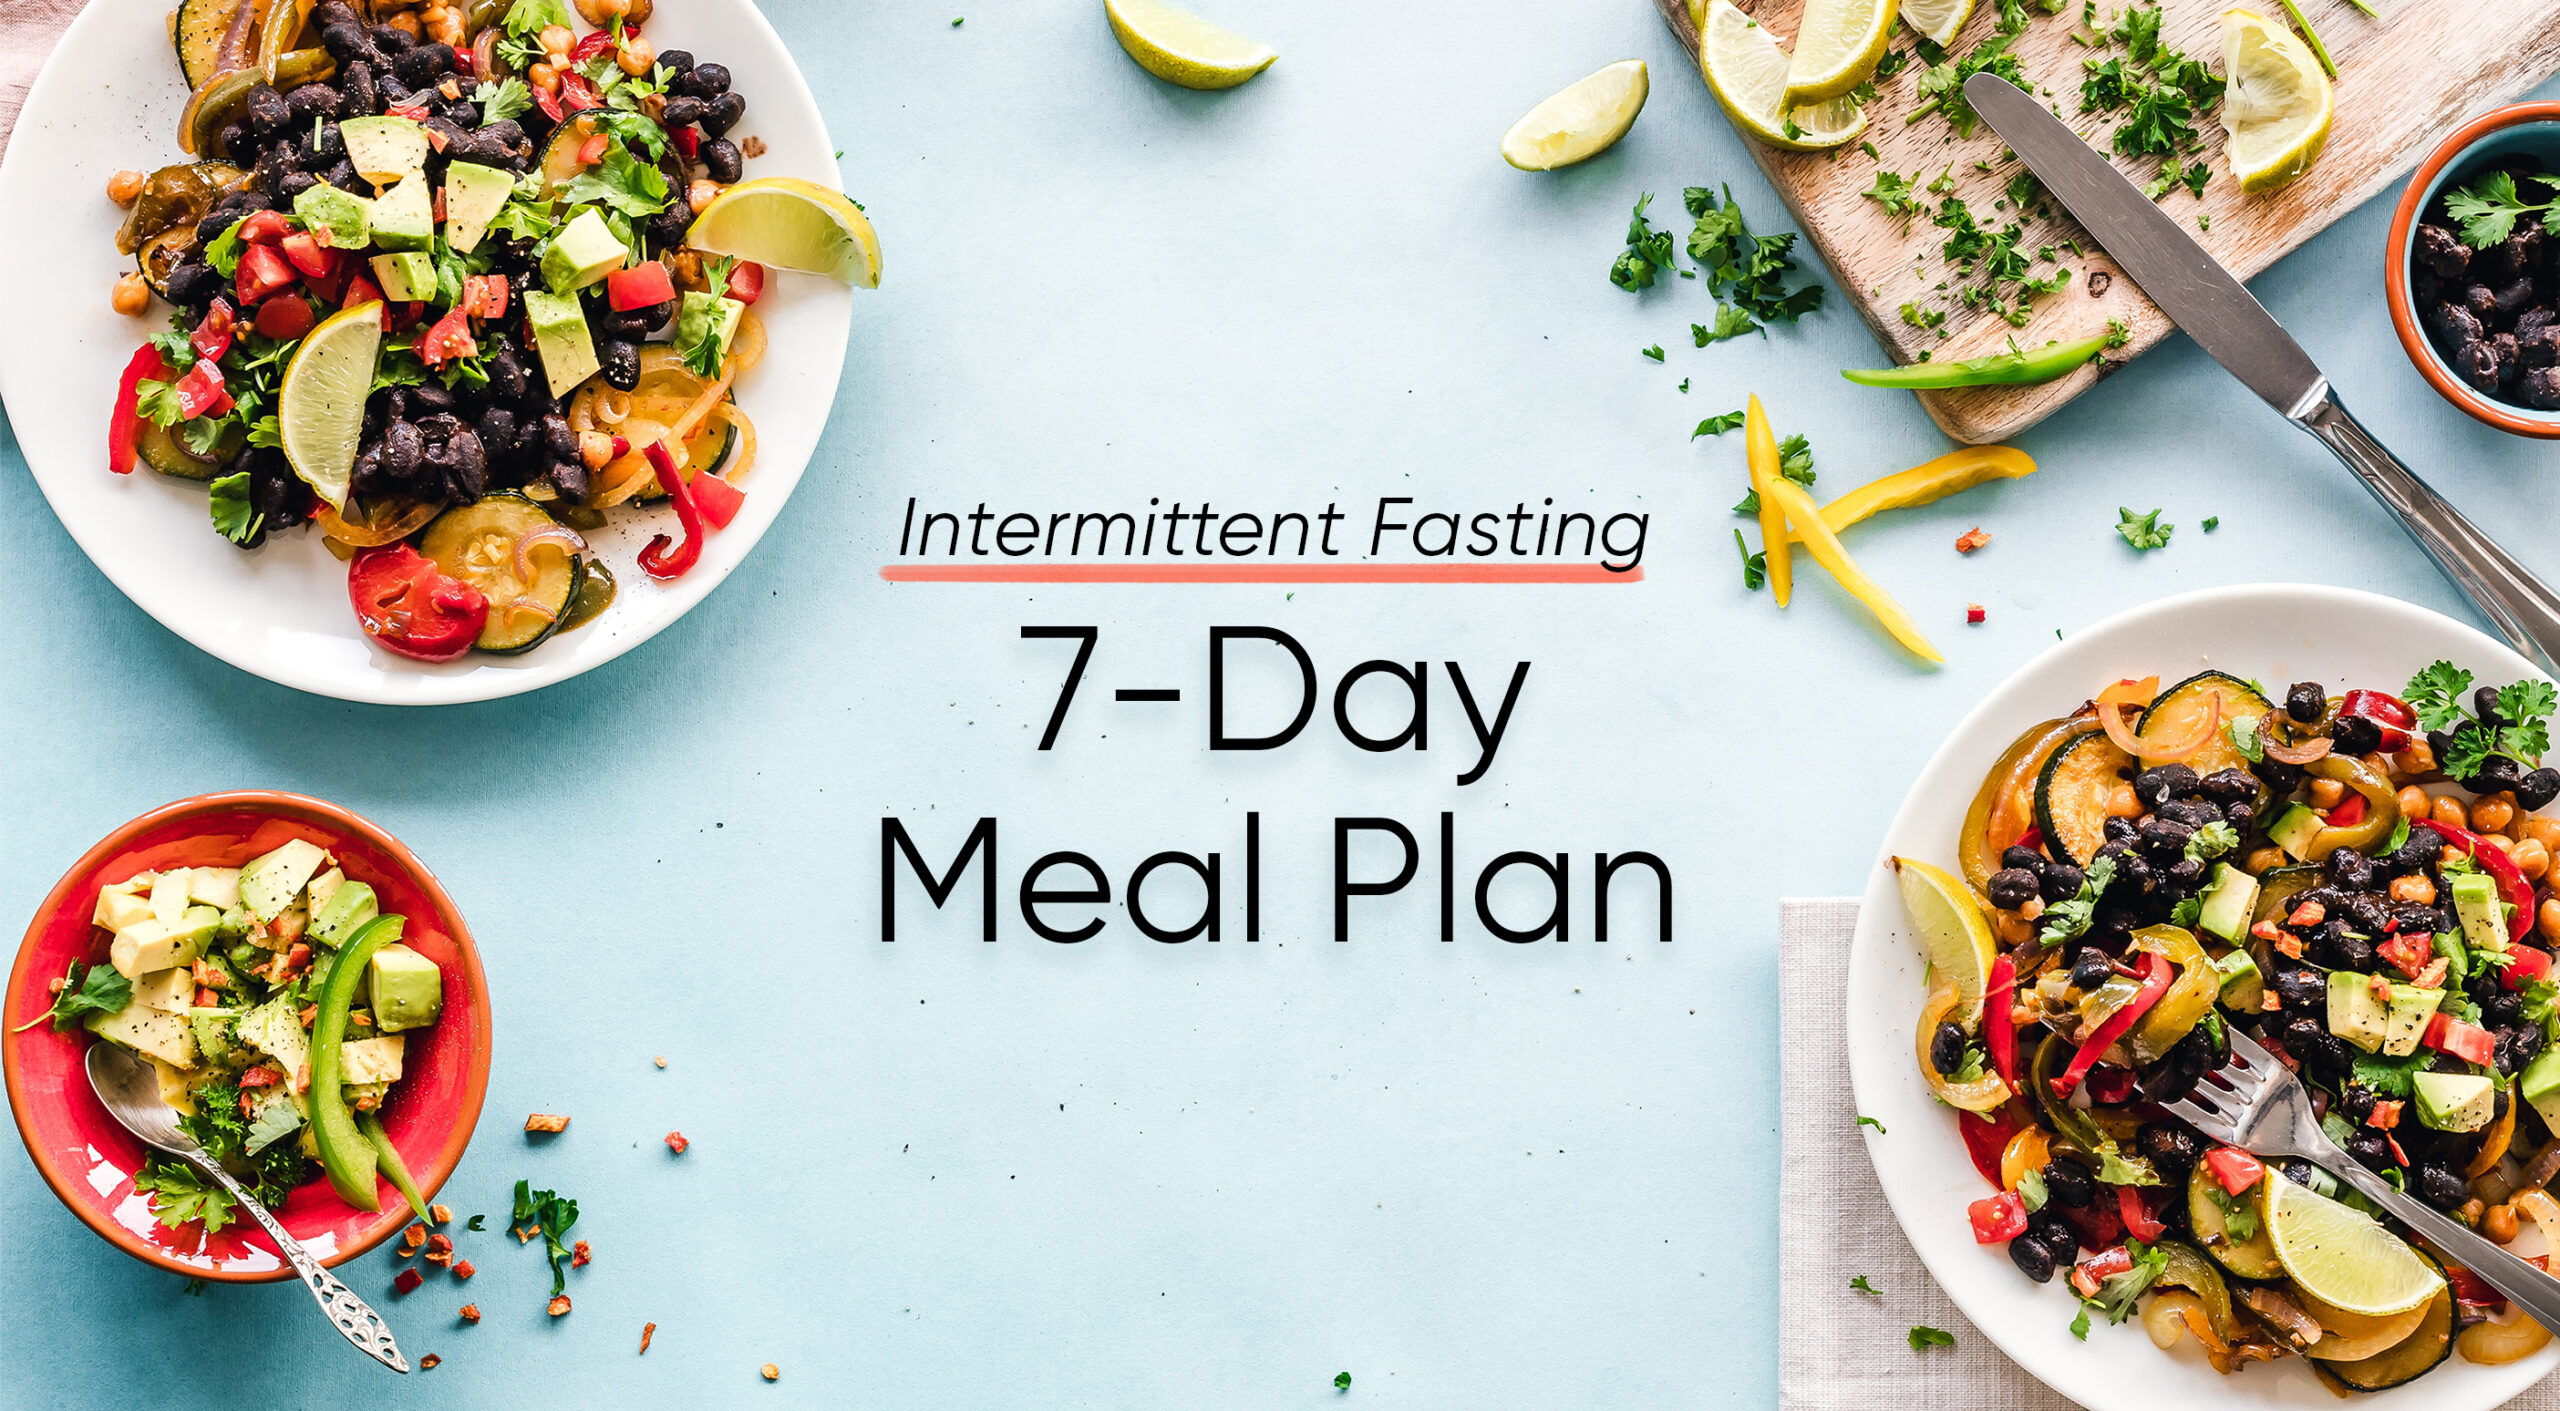 16/8 Intermittent Fasting 7-Day Meal Plan Near Charlotte, NC